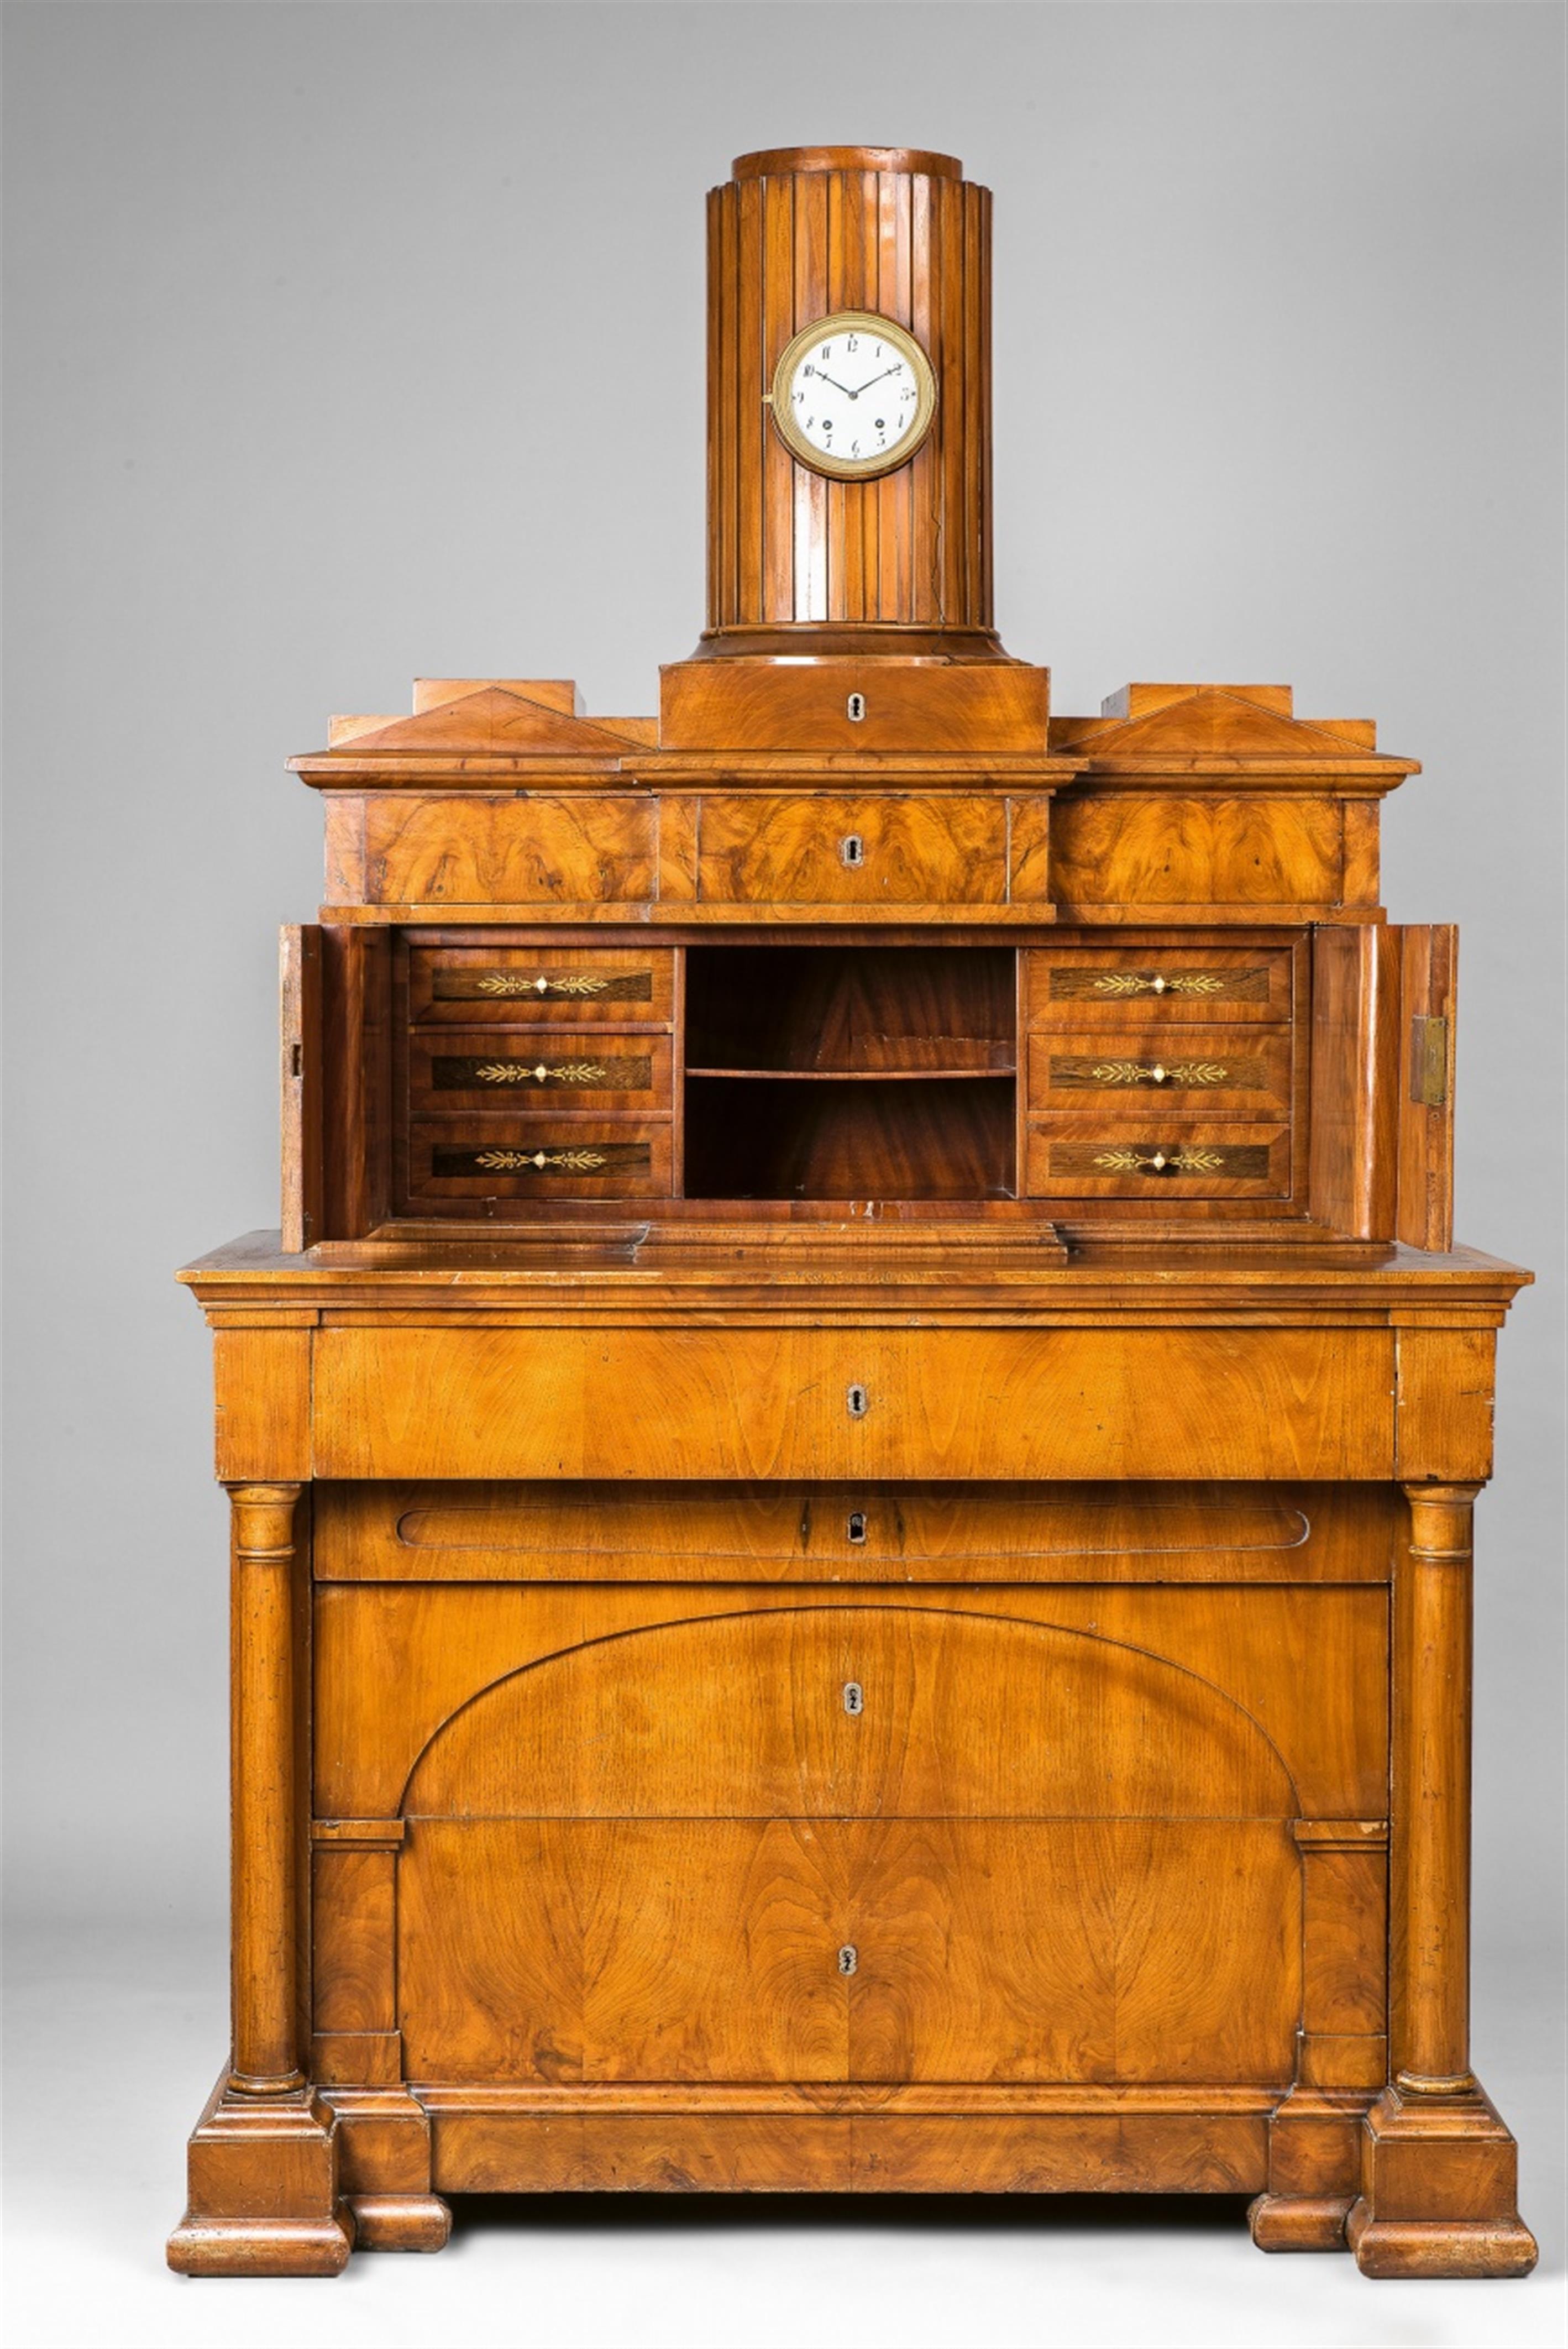 A Bernhard Wanschaff signed Berlin chest of drawers with a clock - image-3